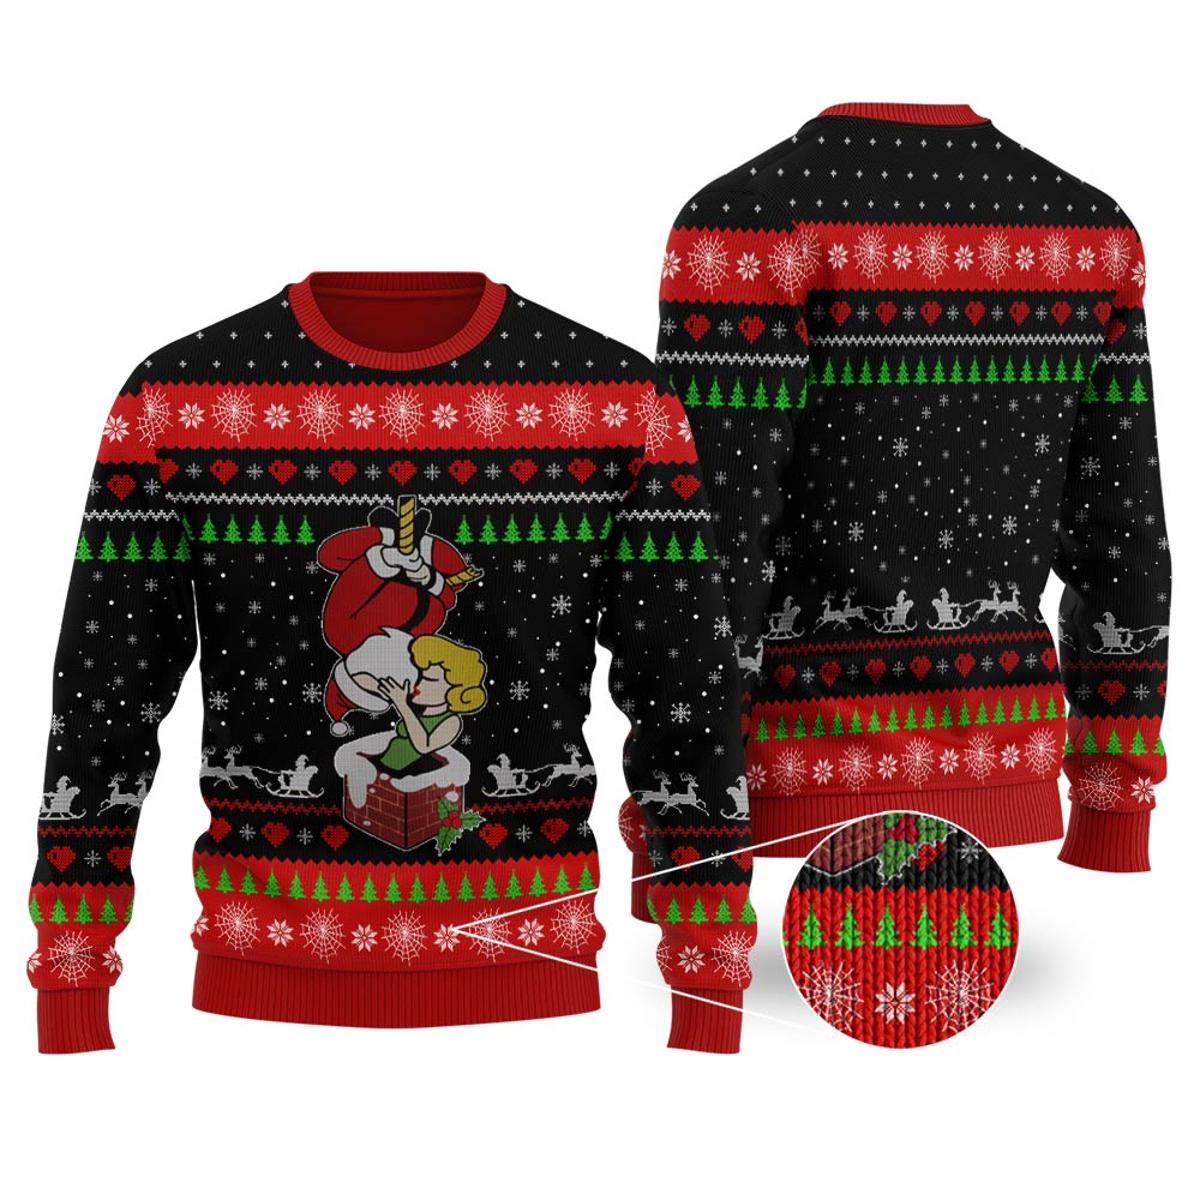 Santa Claus Cocktails Ugly Sweaters